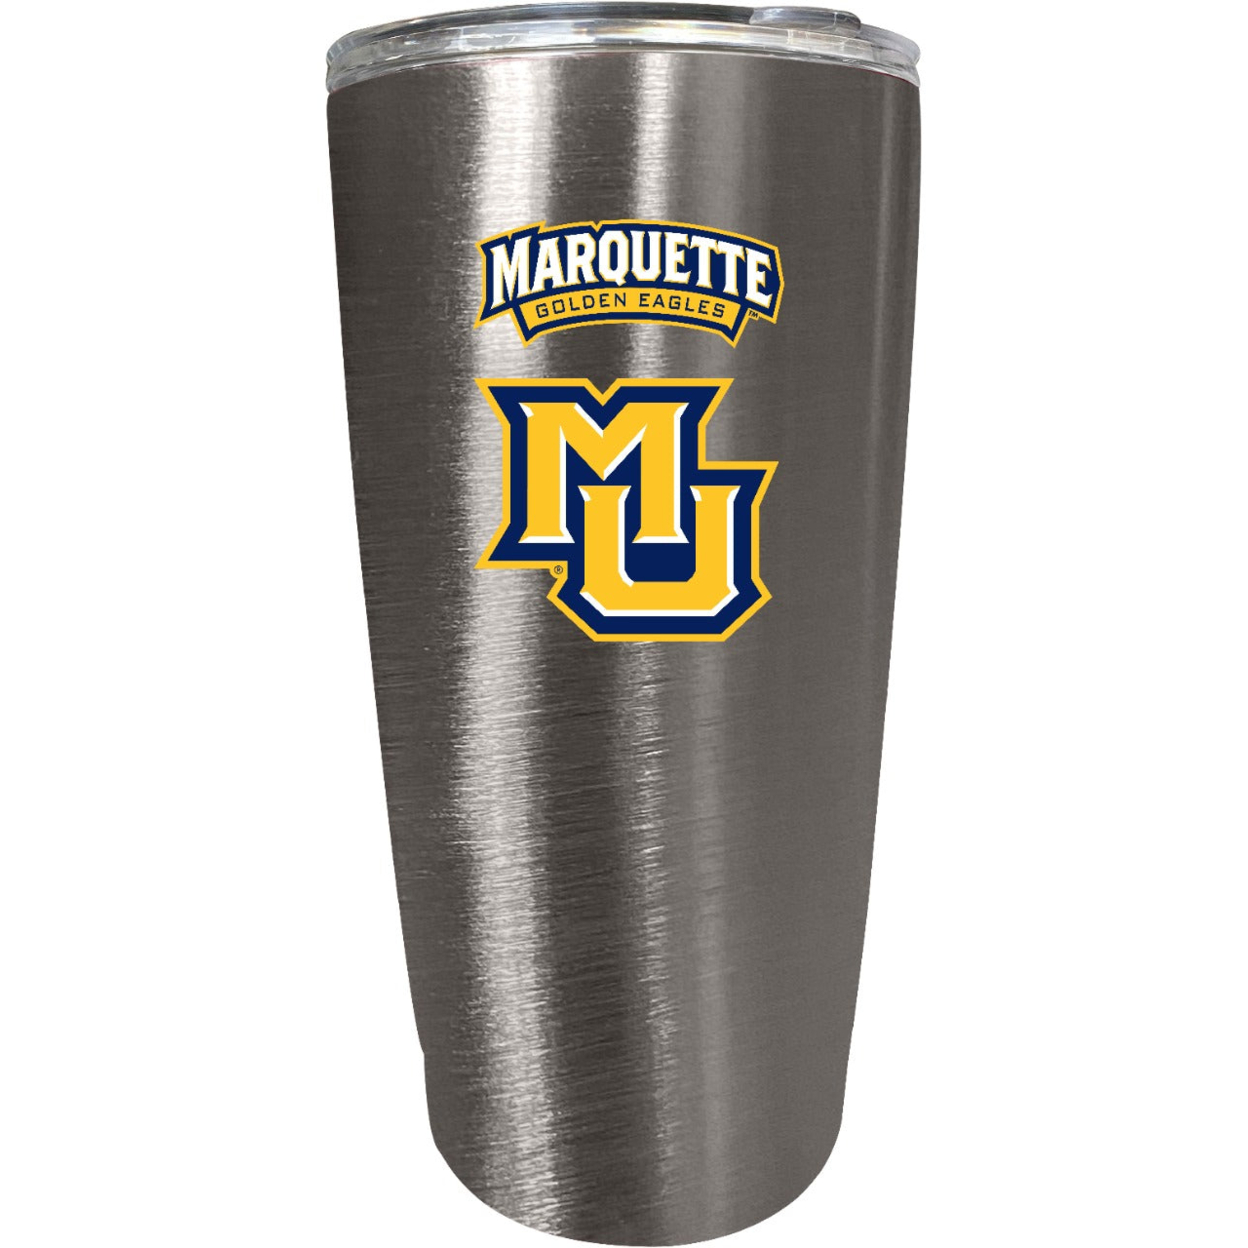 Marquette Golden Eagles 16 Oz Insulated Stainless Steel Tumbler Colorless